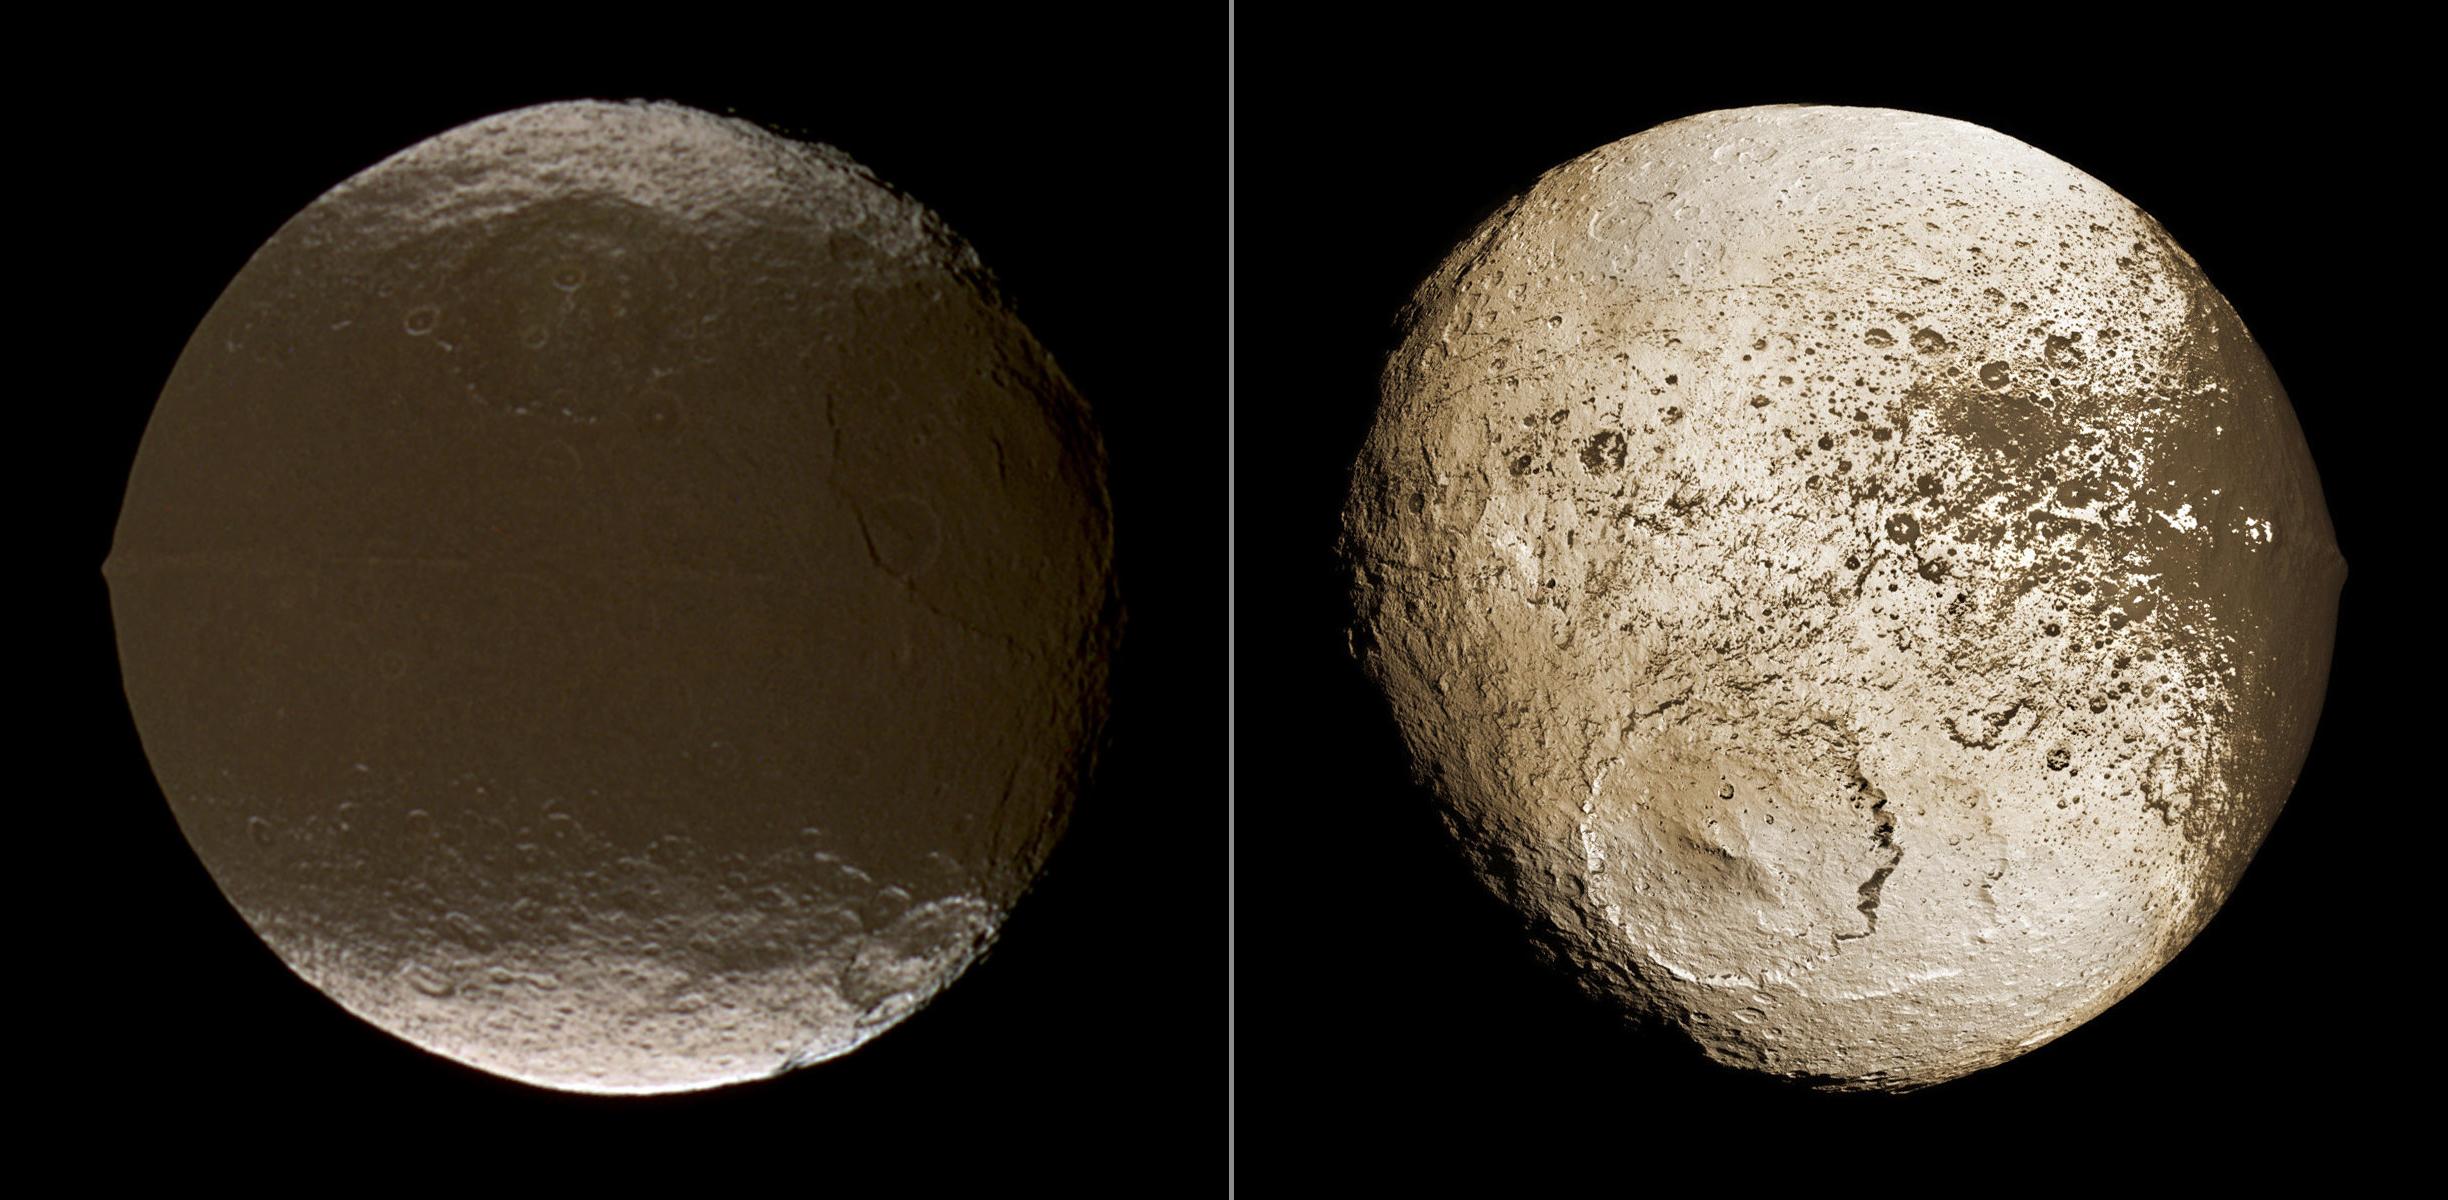 two panels showing two different views of Iapetus. The left panel shows a very dark surface while the right panel shows a very light colored surface.